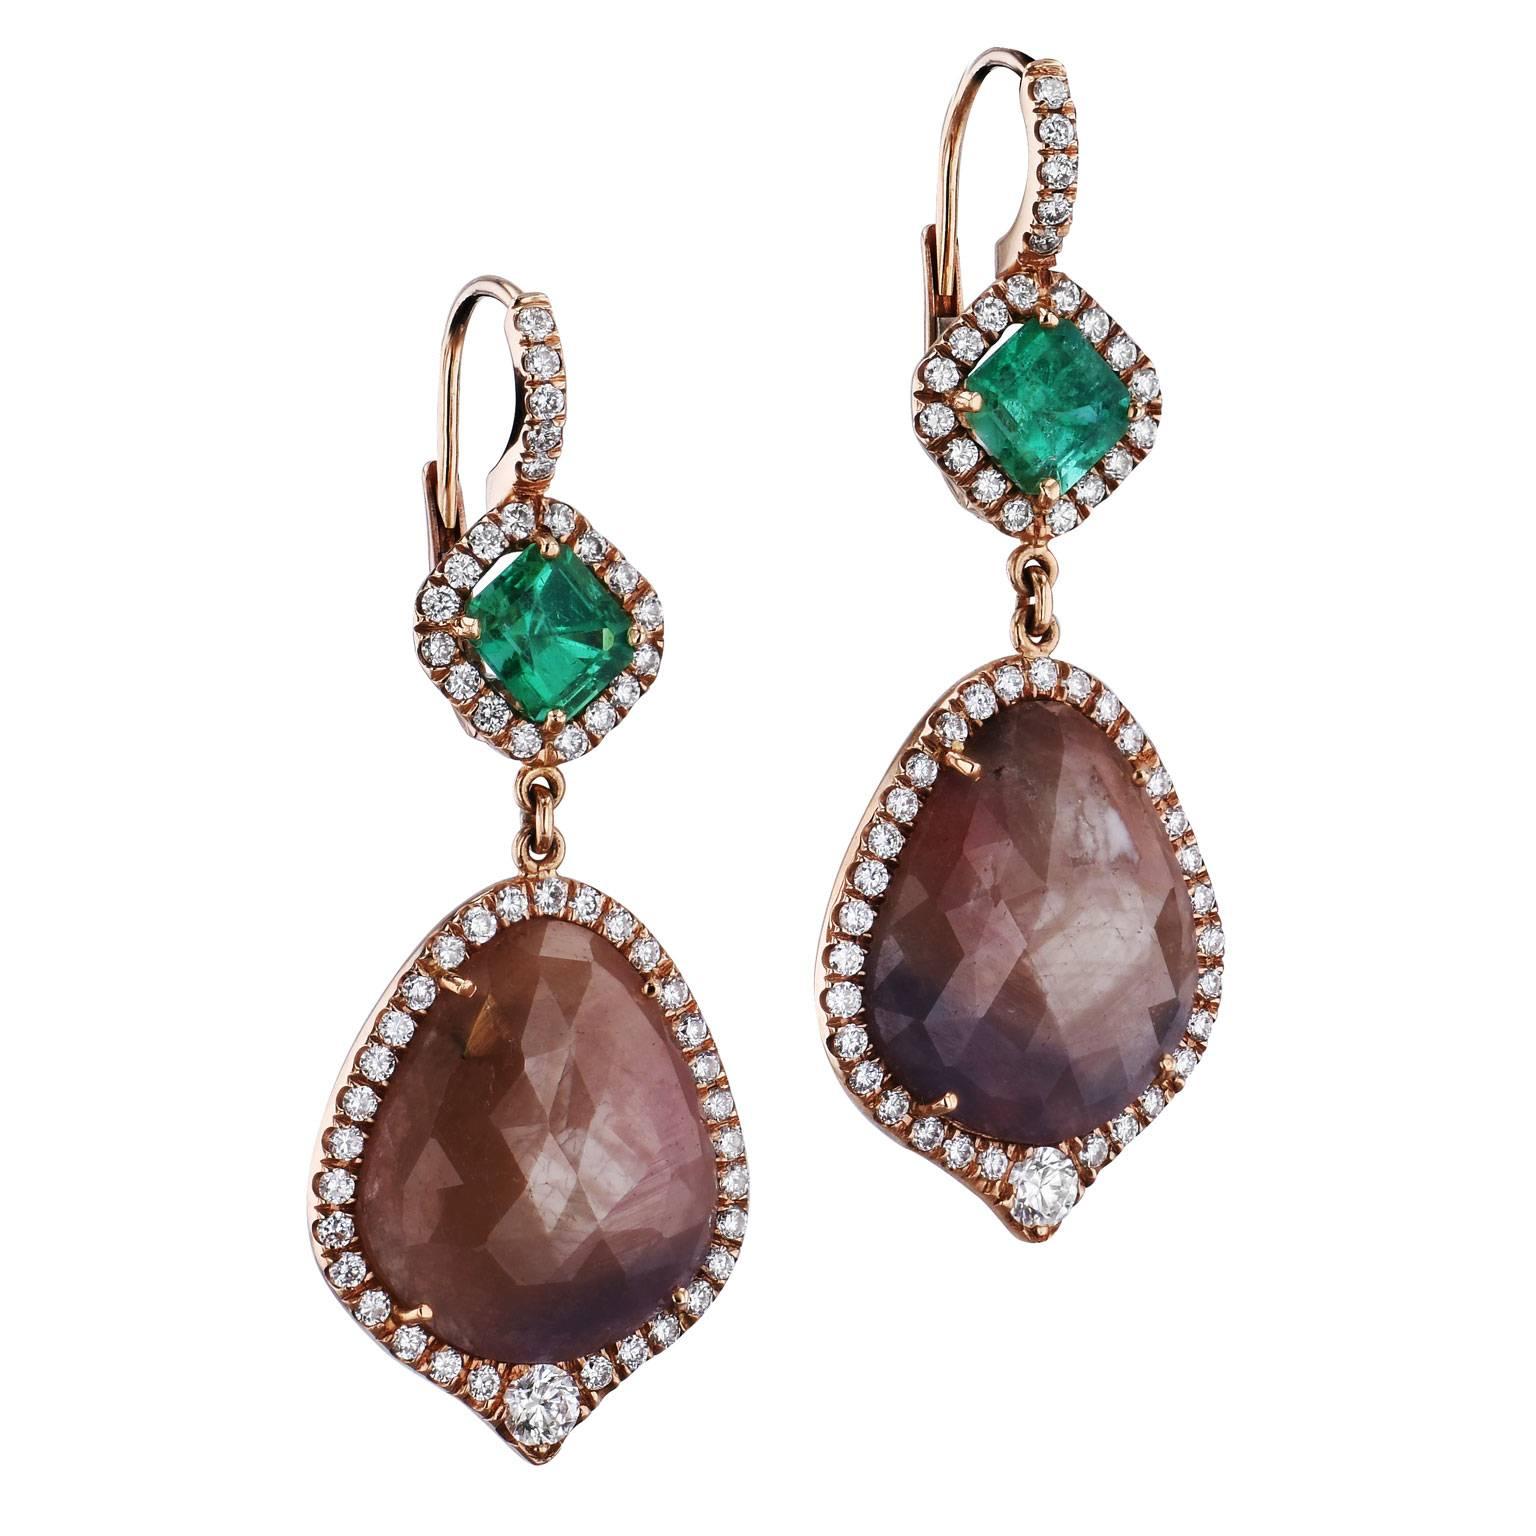 Hues of light brown and crystalline green dance together, enchanting the eye and highlighting texture.  These stunning earrings are handmade and one of a kind by H&H Jewels.  They feature 20.00 carat of light brown sapphire slices are embraced by